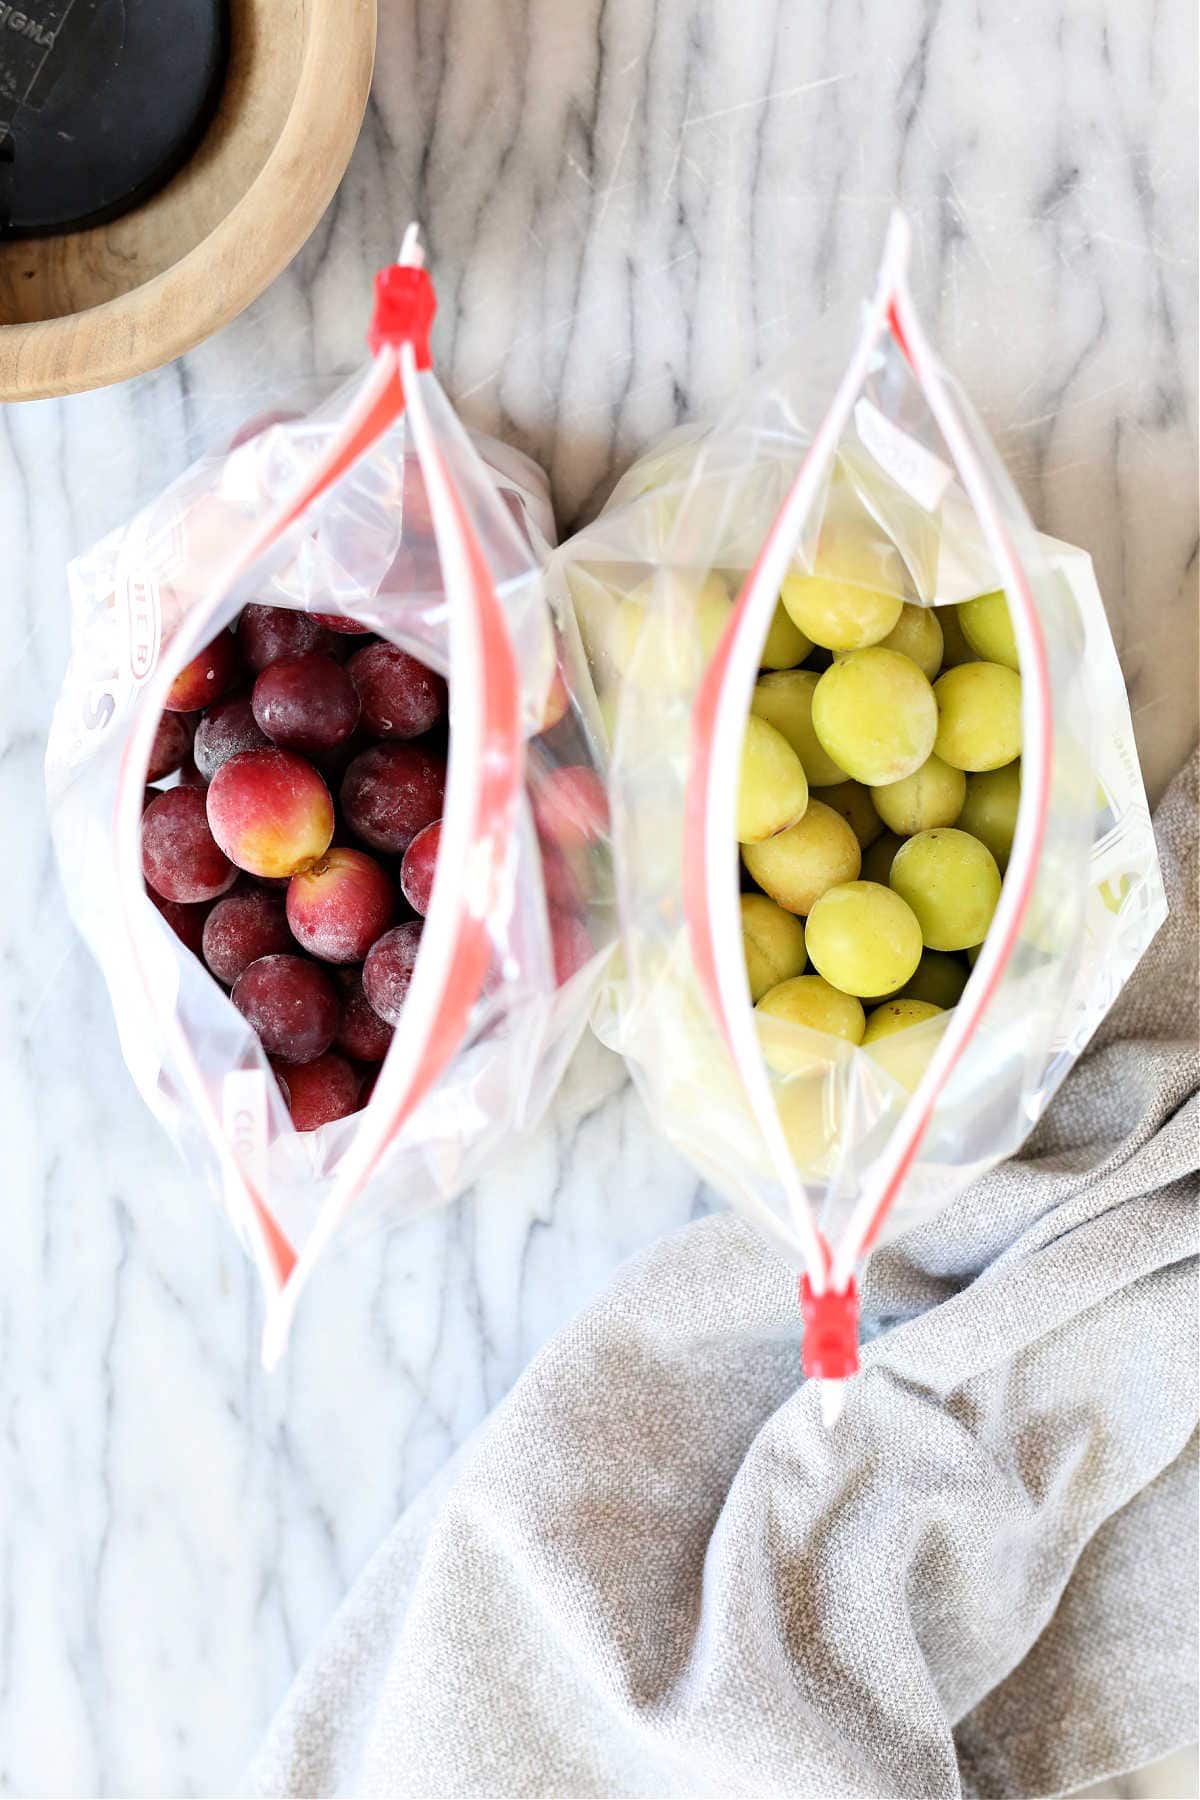 red grapes and green grapes frozen and stored in freezer bags